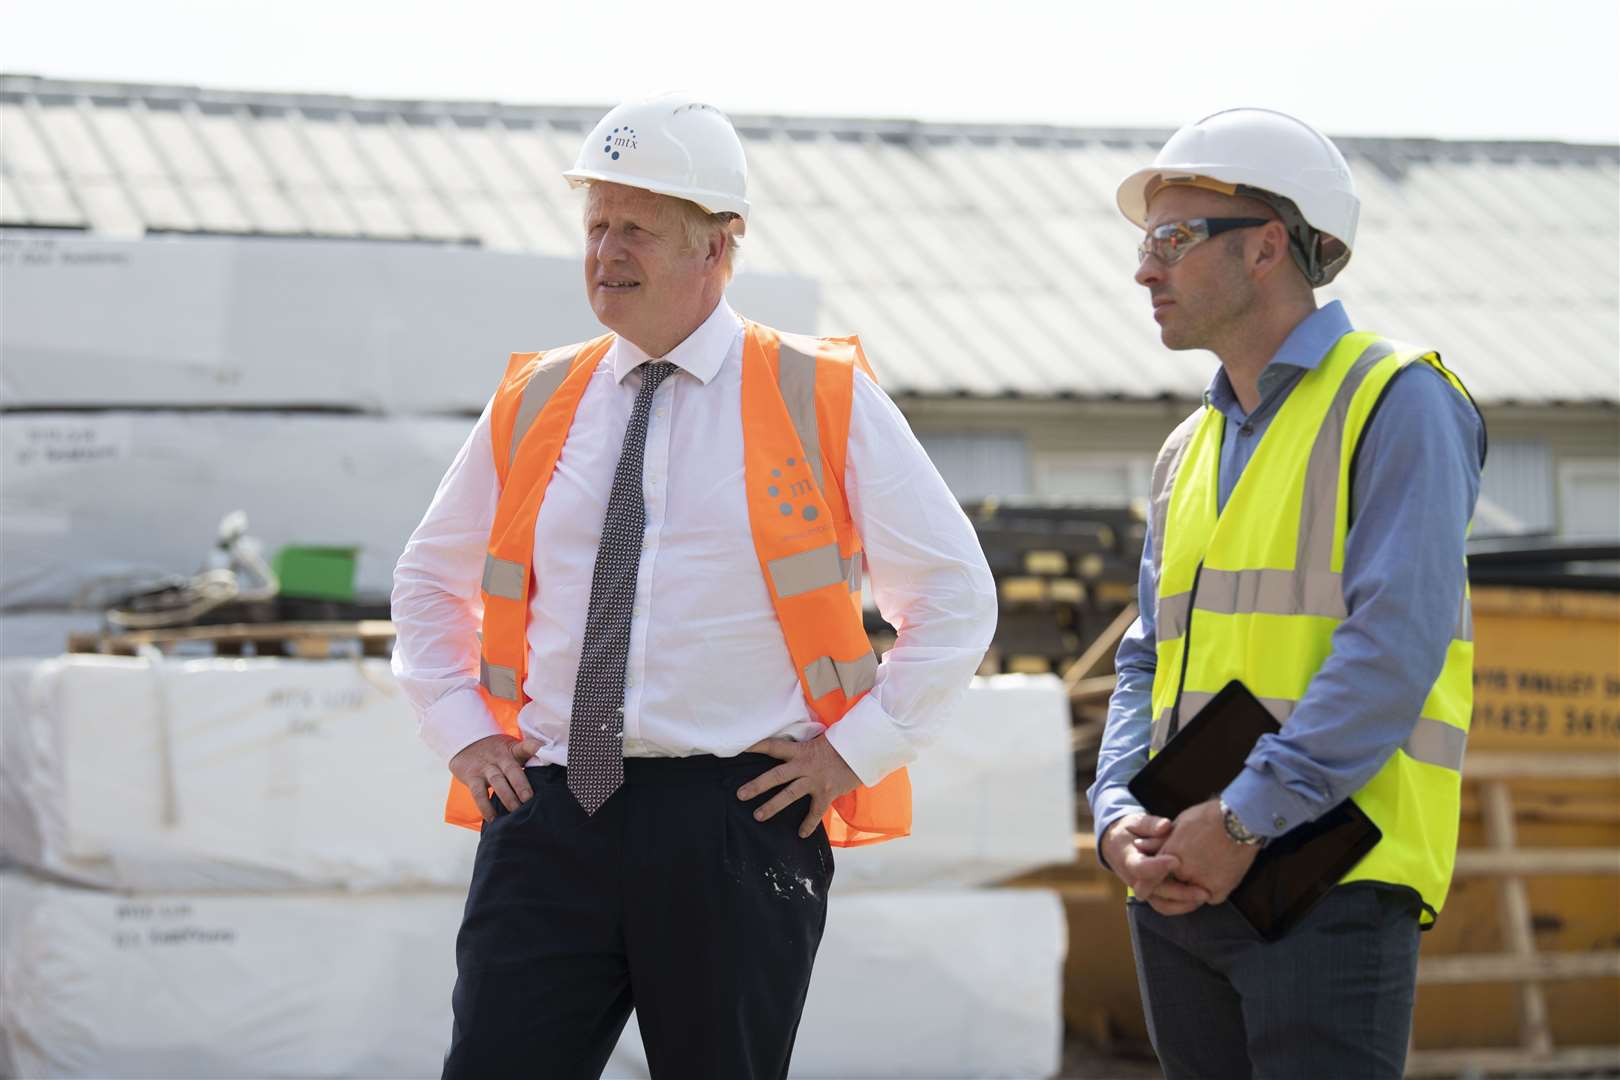 Prime Minister Boris Johnson has been keen to be seen to encourage growth in the construction sector (Matthew Horwood/PA)